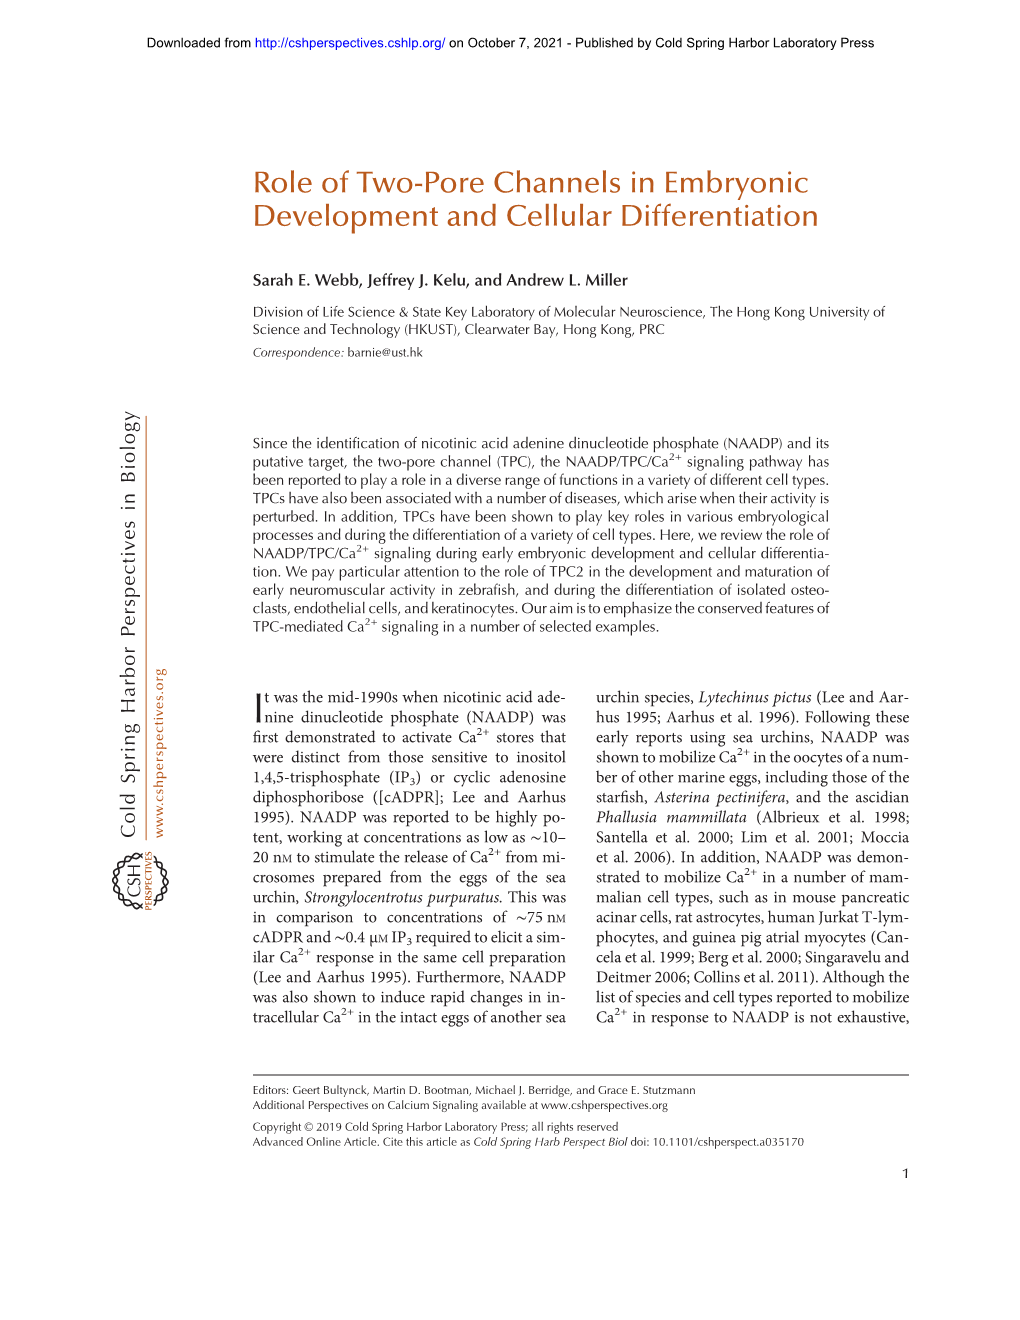 Role of Two-Pore Channels in Embryonic Development and Cellular Differentiation